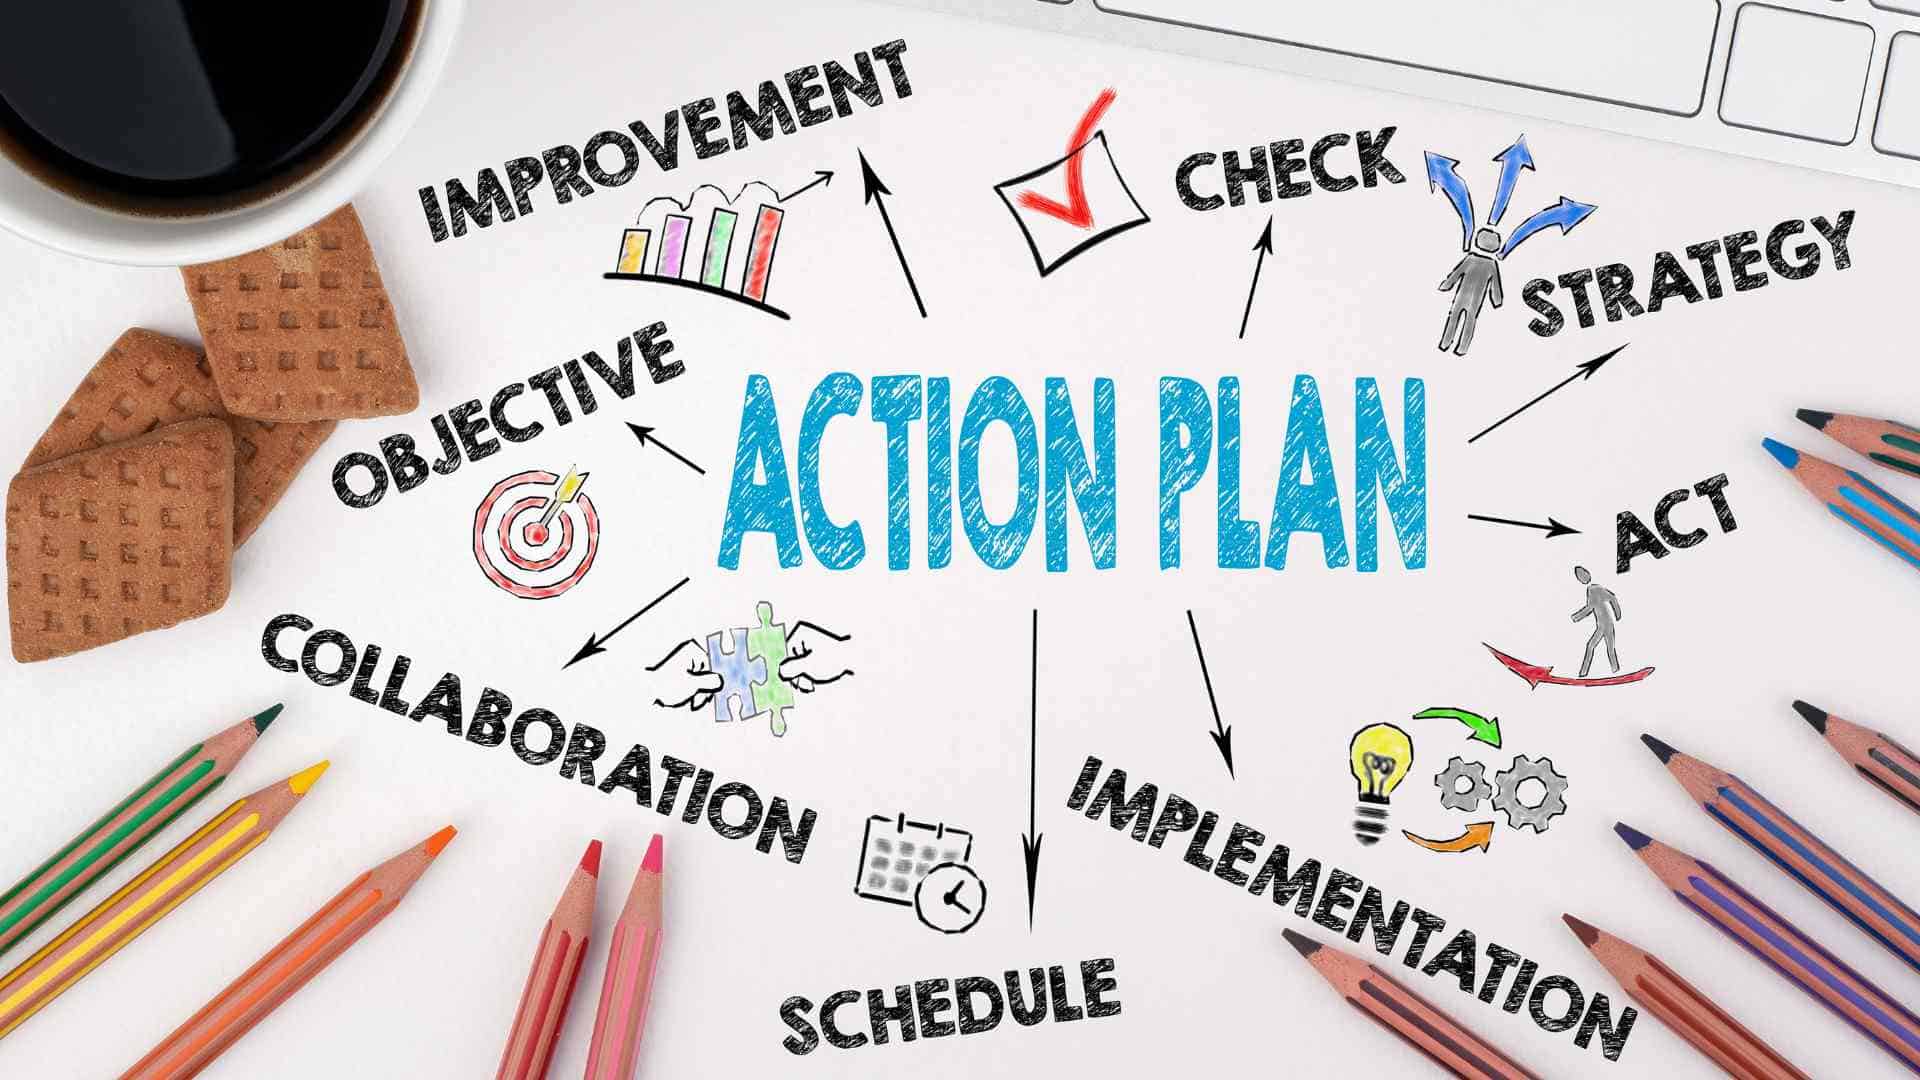 Develop a Plan of Action